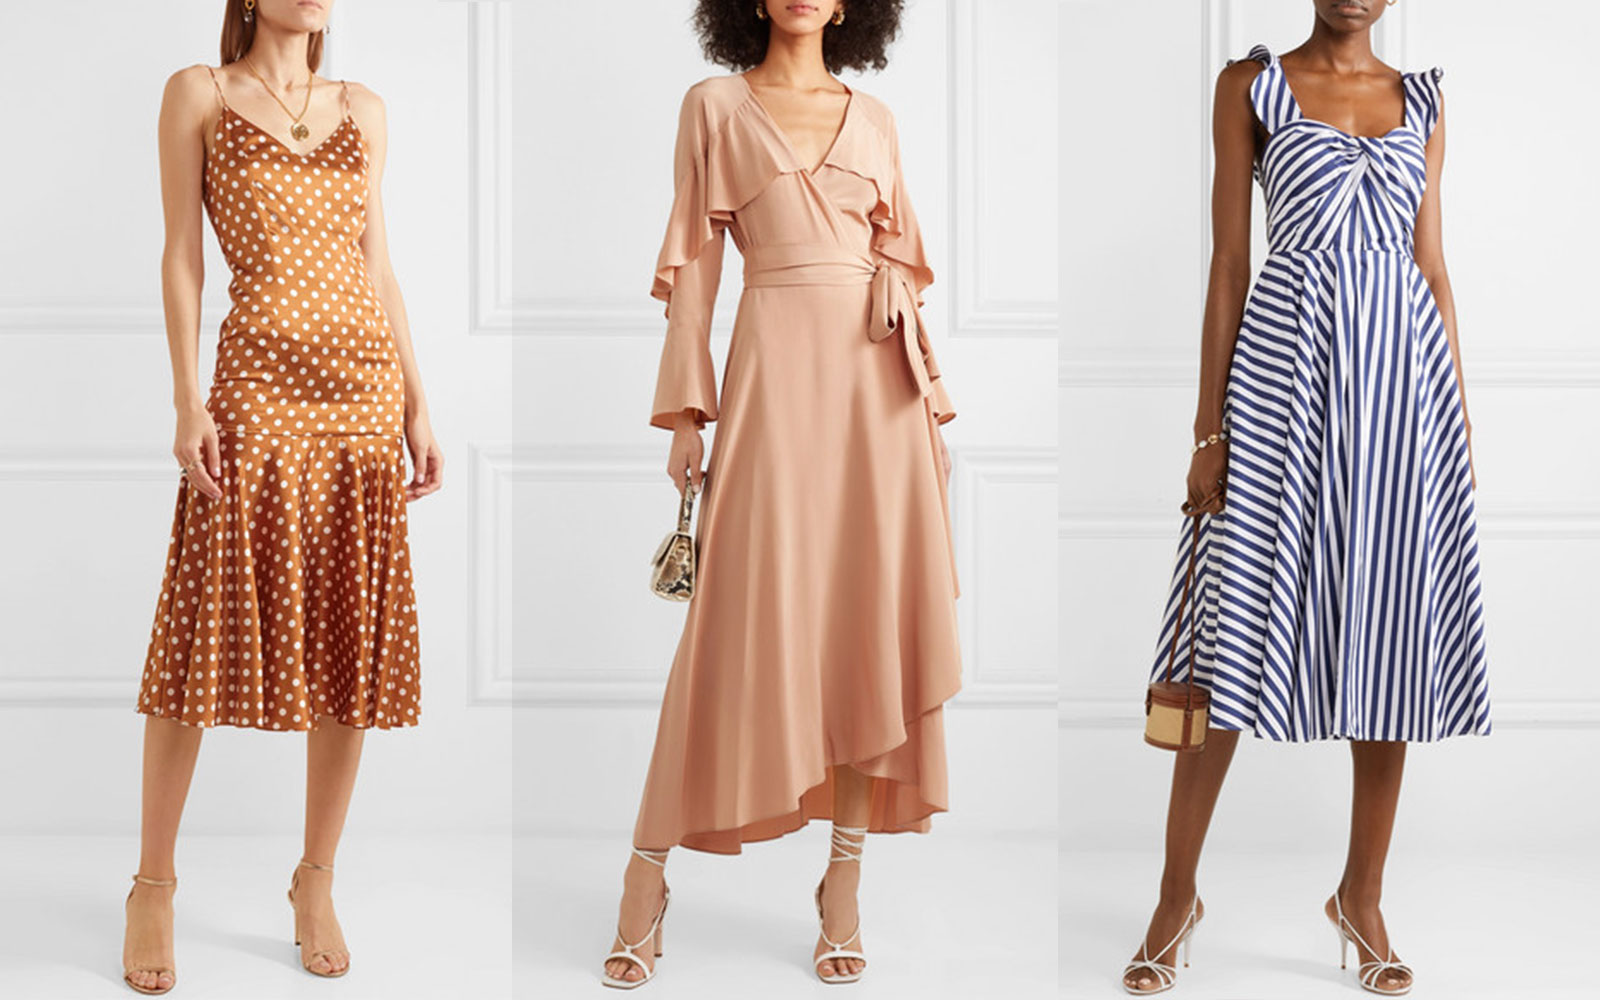 7 versatile summer dresses and how to style them from day to night